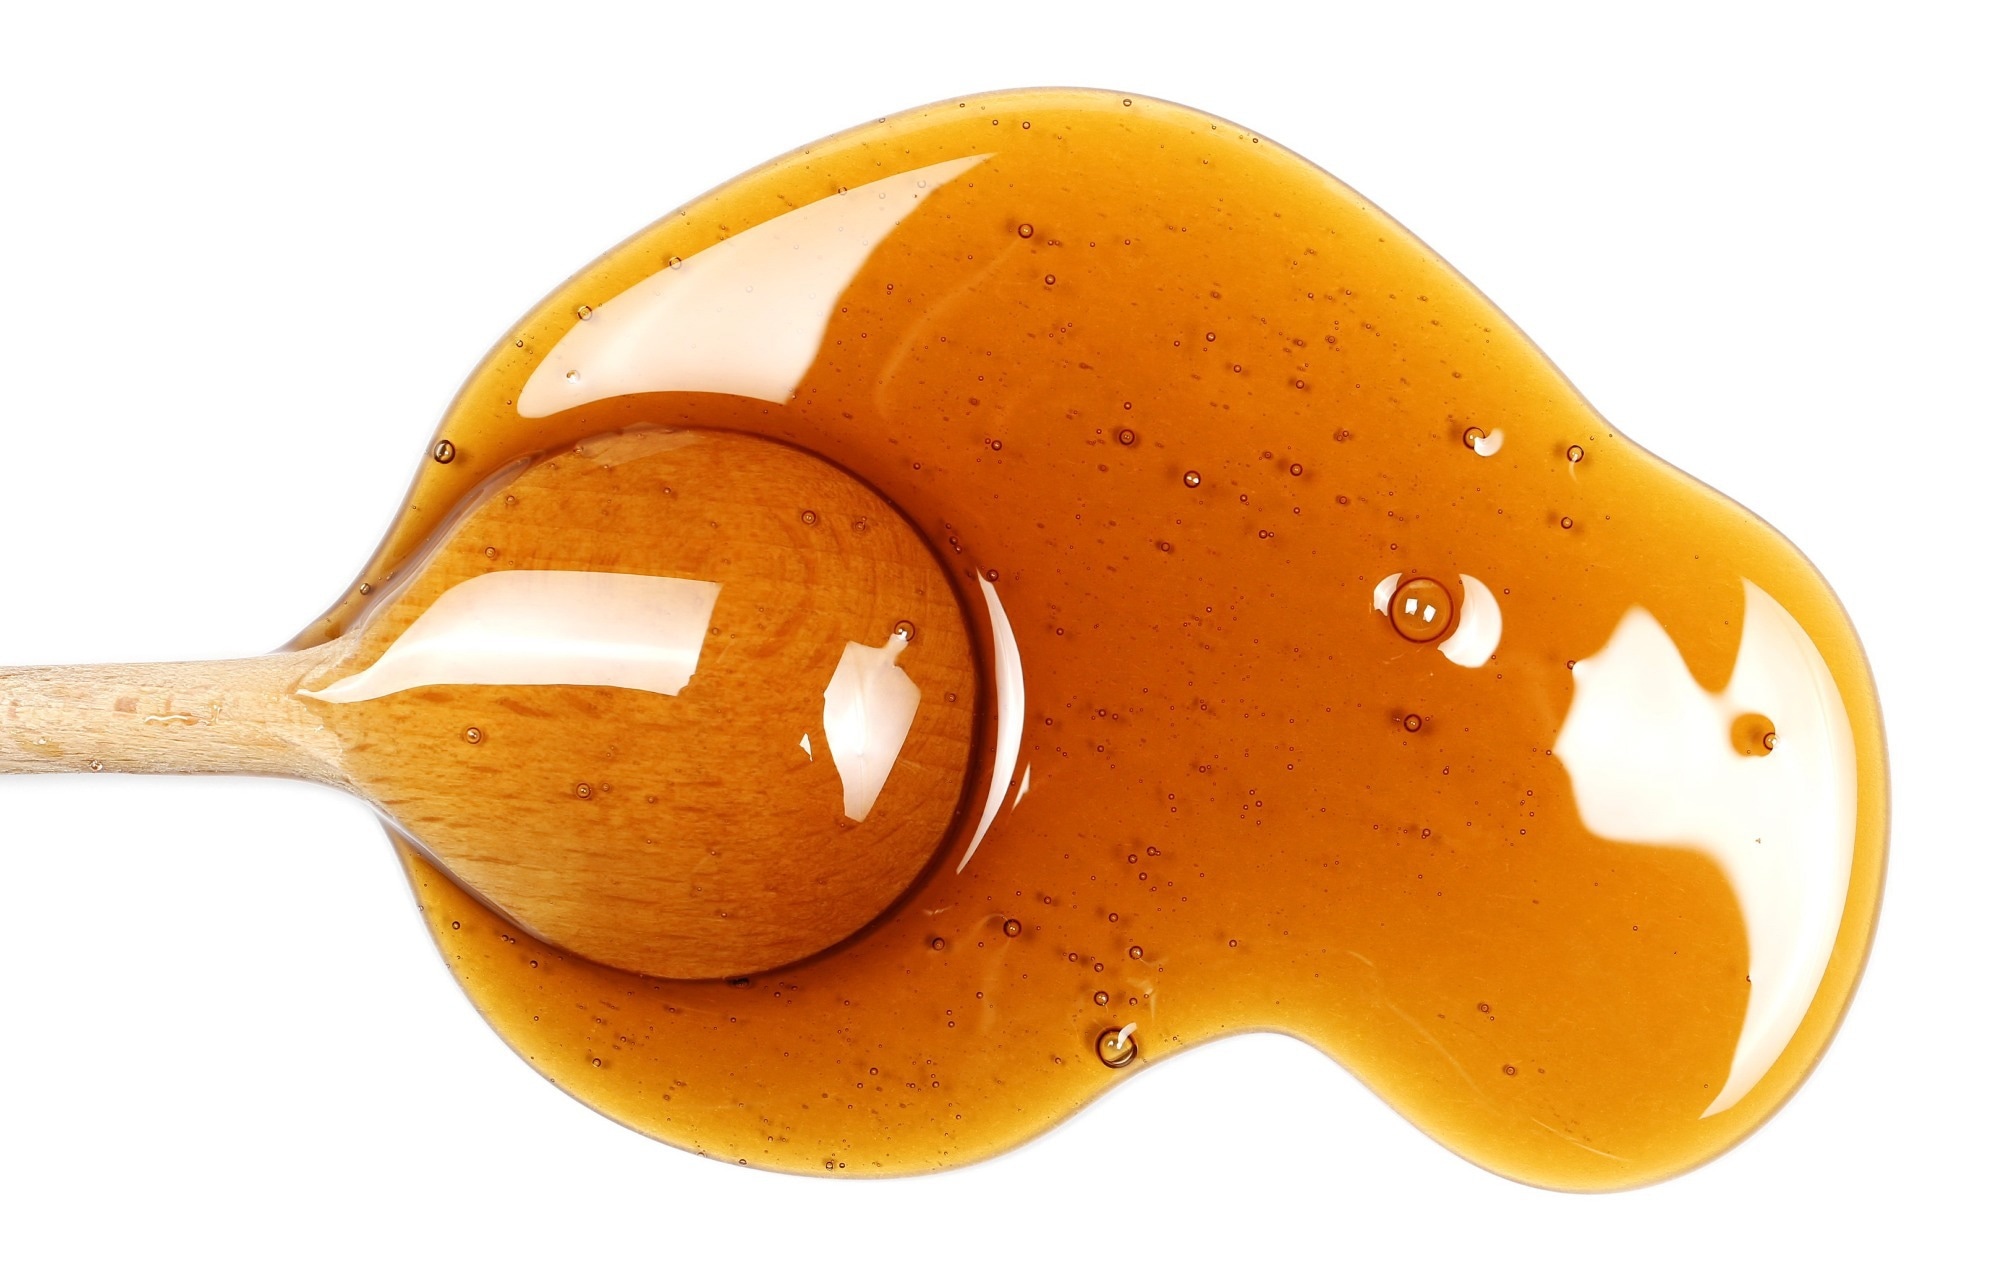 Is maple syrup the ultimate natural sweetener? Researchers say it’s more than just tasty!